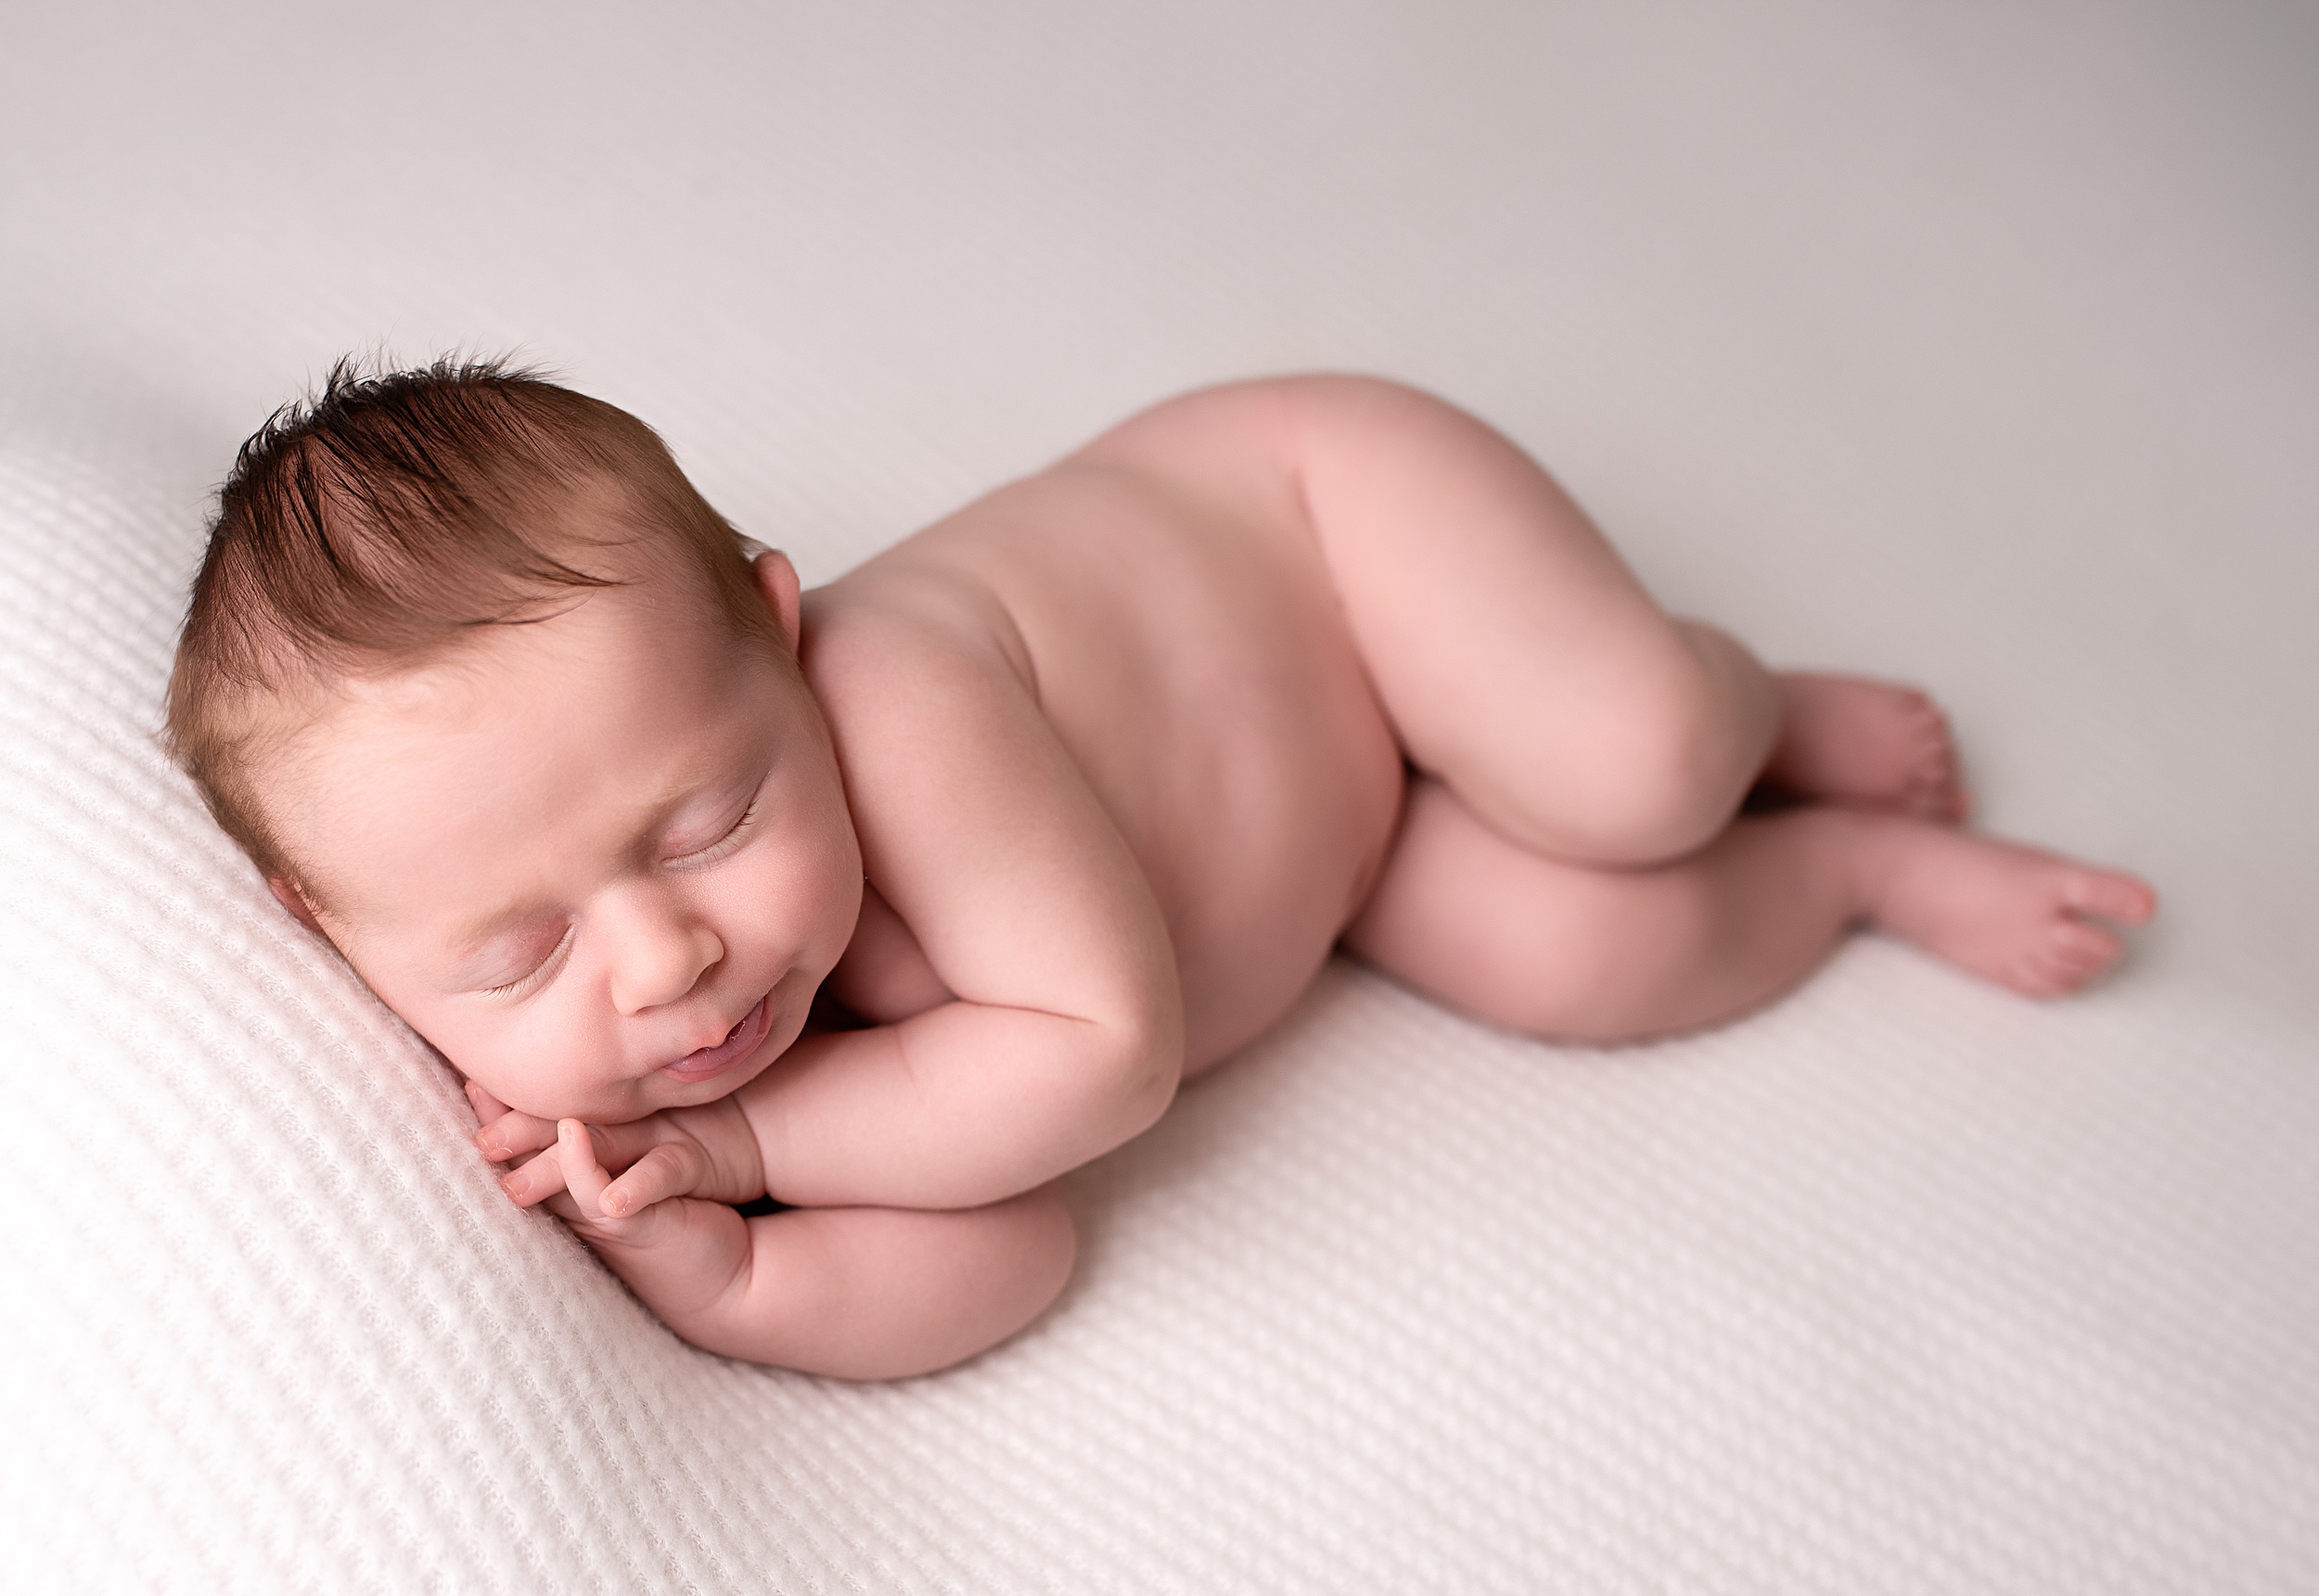 A newborn baby sleeps on its side naked on a white bed san diego night nanny